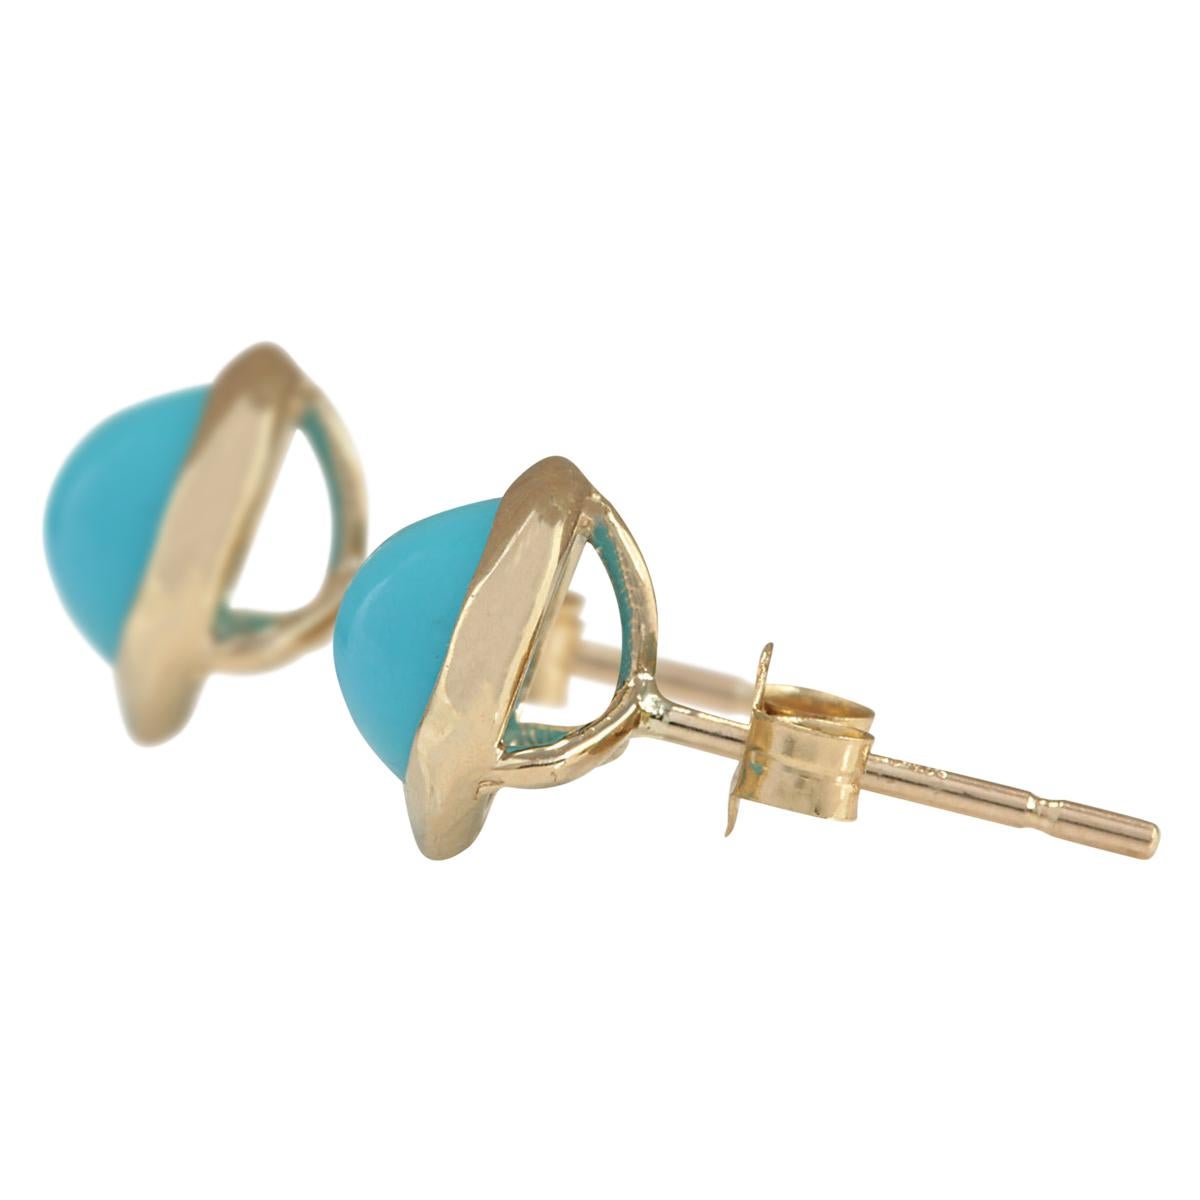 Turquoise Earrings In 14 Karat Yellow Gold In New Condition For Sale In Manhattan Beach, CA